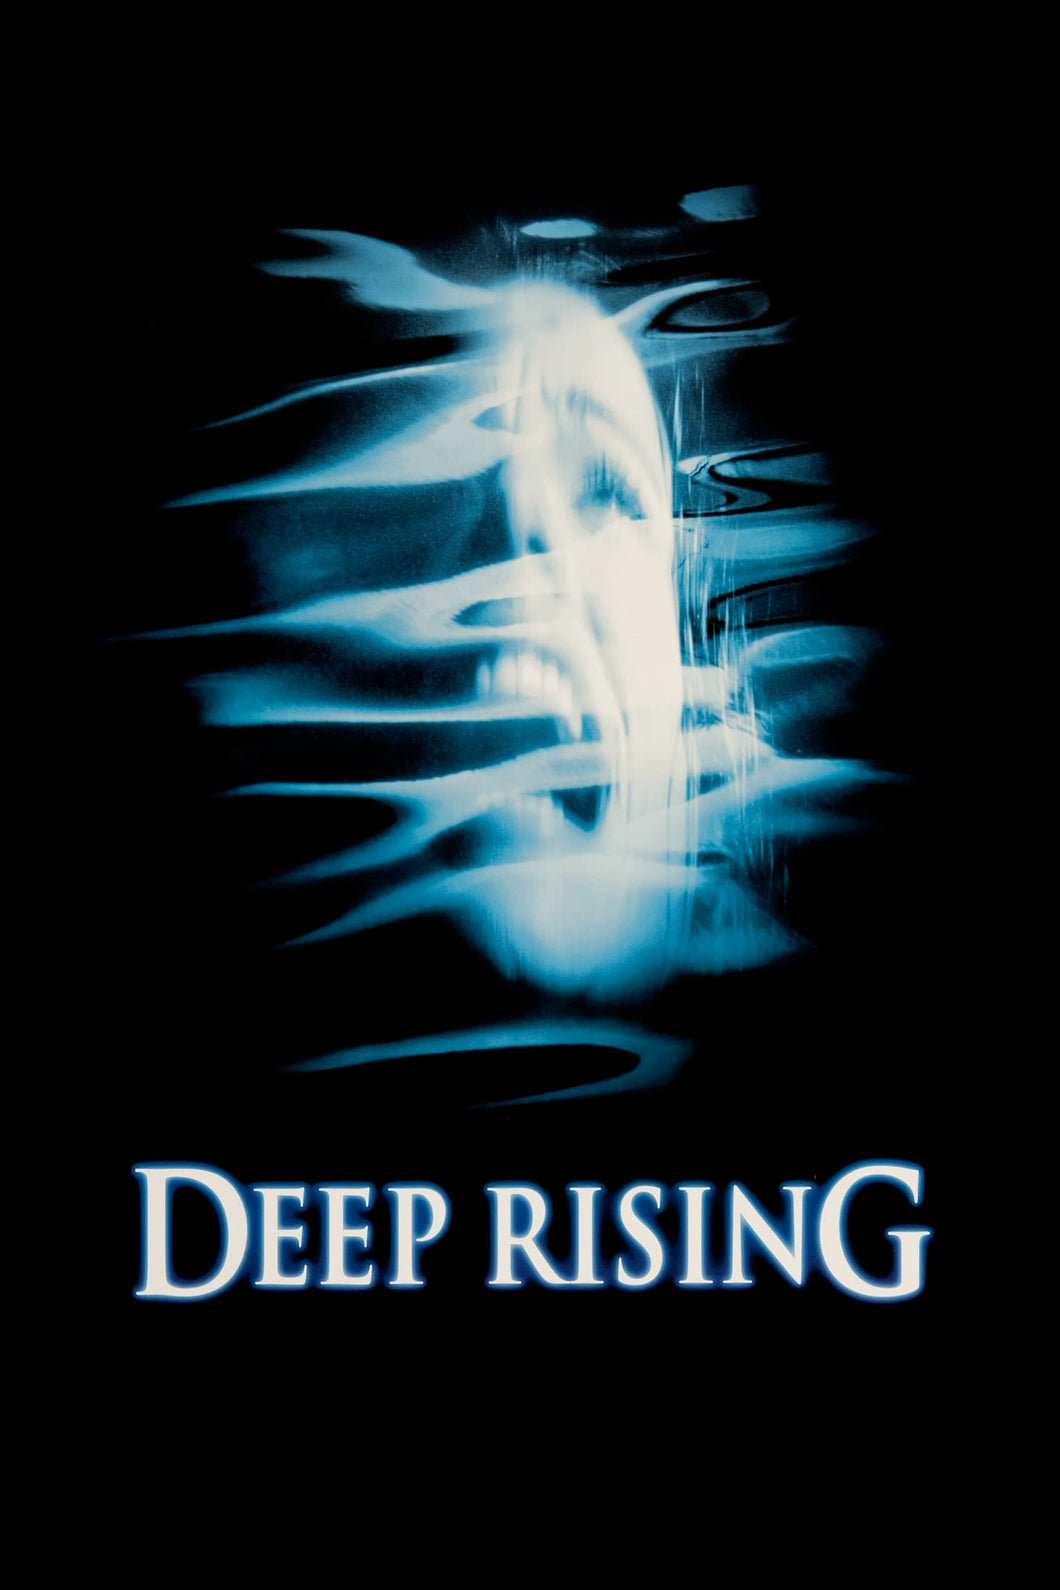 Deep Rising (1998) Movie Poster High Quality Glossy Paper A1 A2 A3 A4 A3 Framed or Unframed!!!